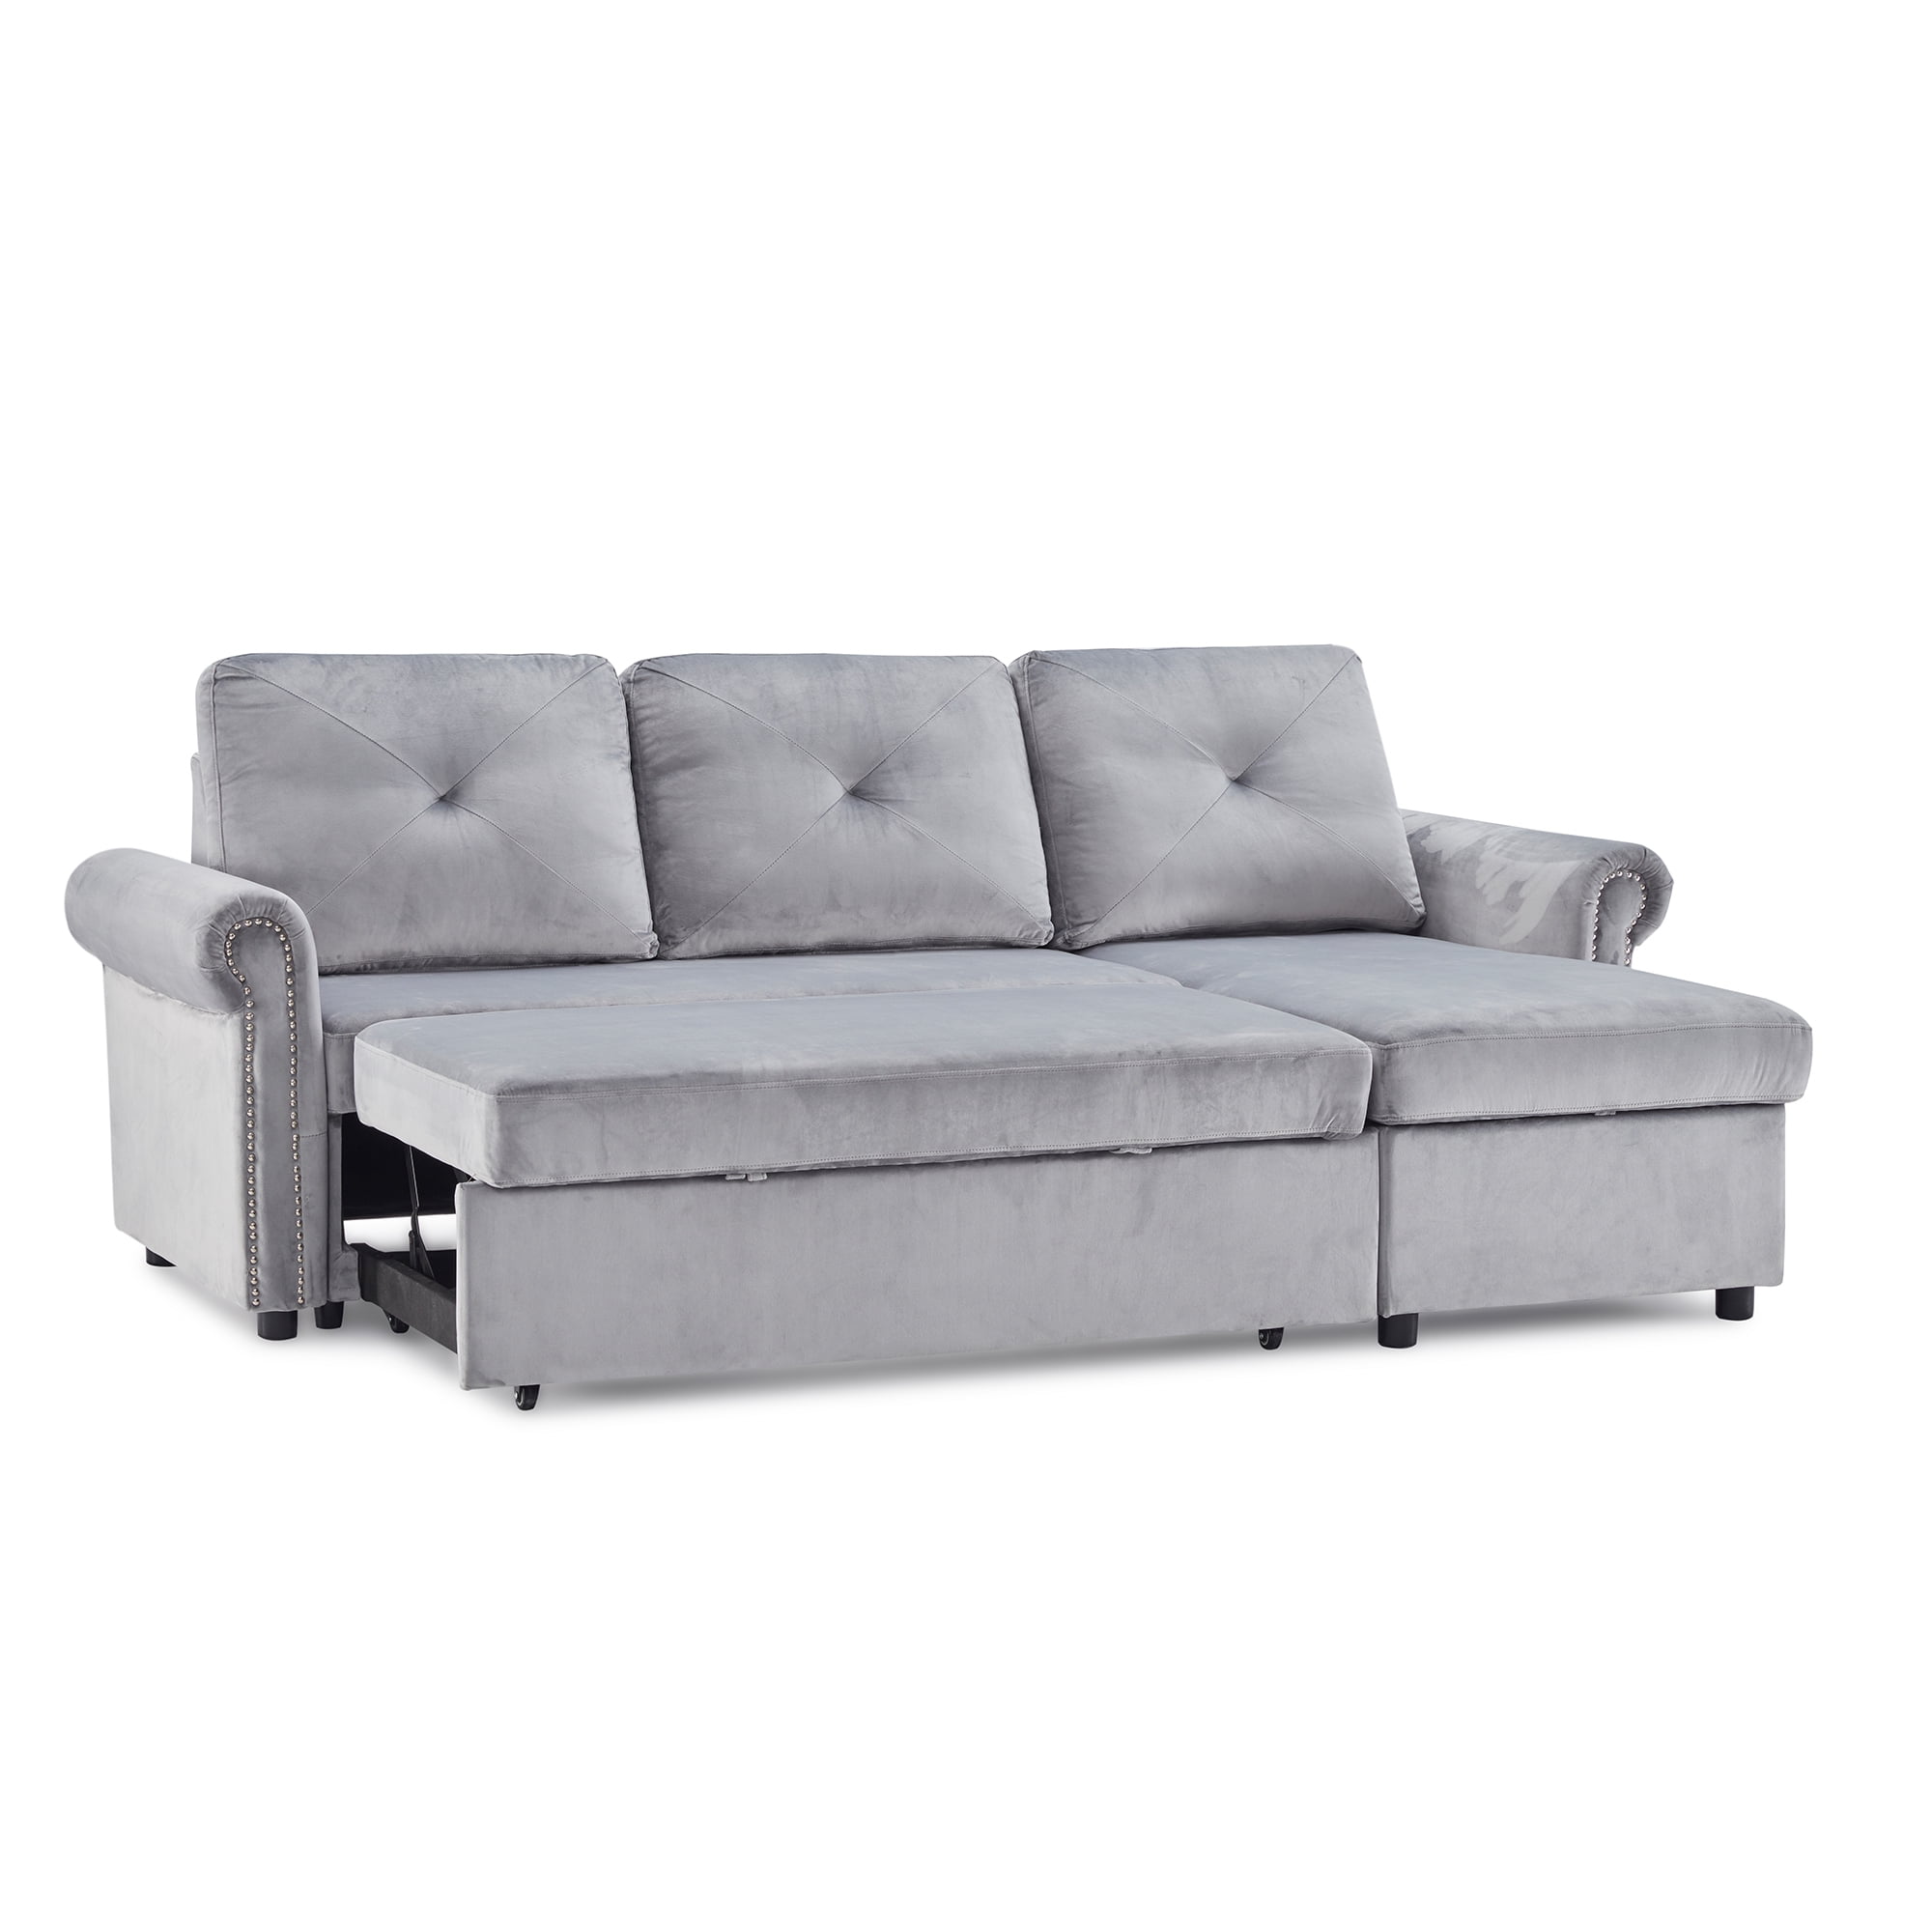 Upholstery Twin Sleeper Tufted Sofa Bed, Fold Out Twin Bed Couch